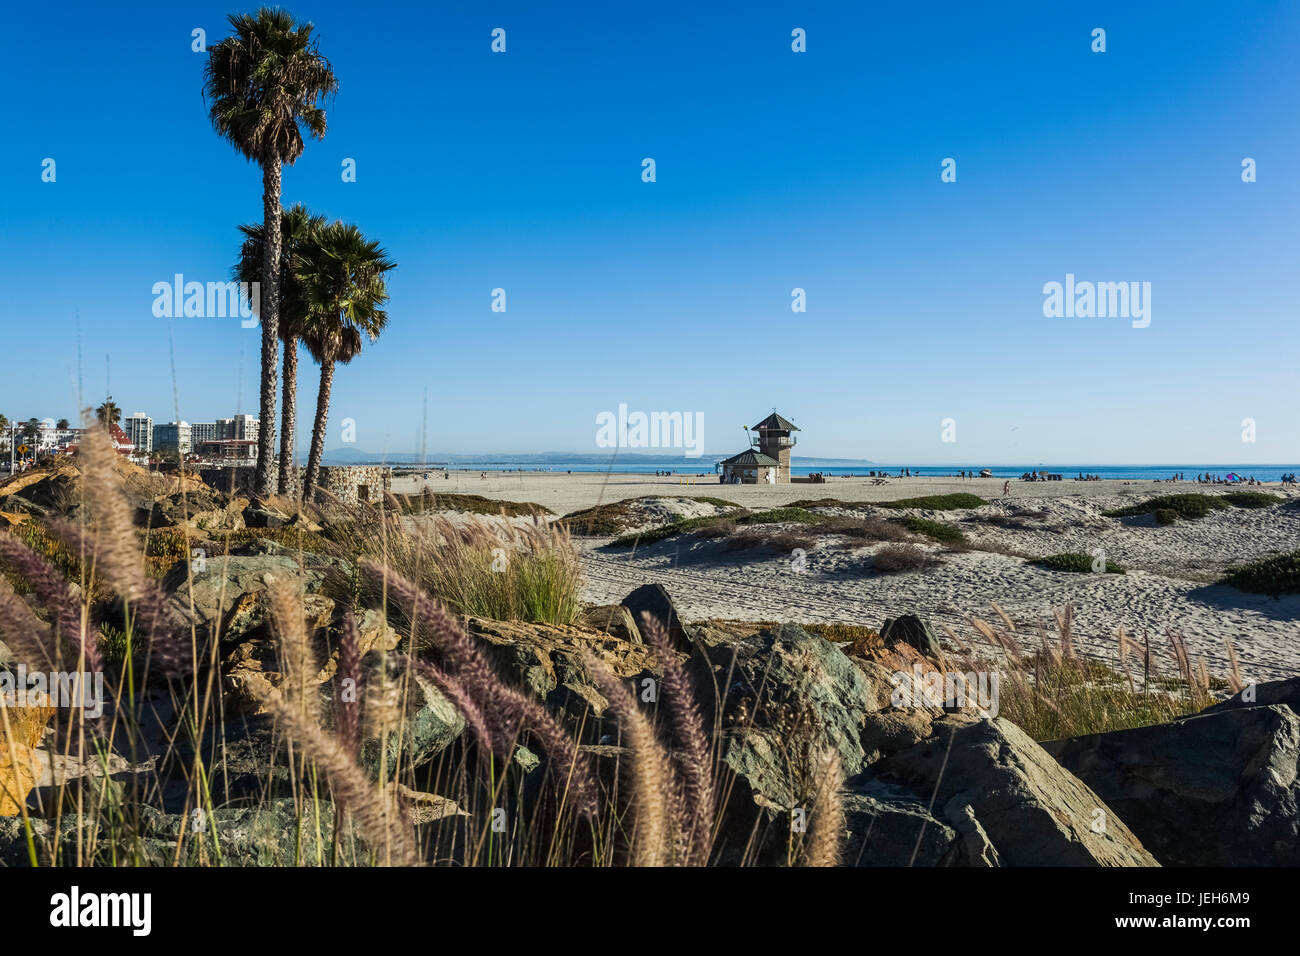 Palm trees and rocks along the beach with a view of the ocean; California, United States of America Stock Photo